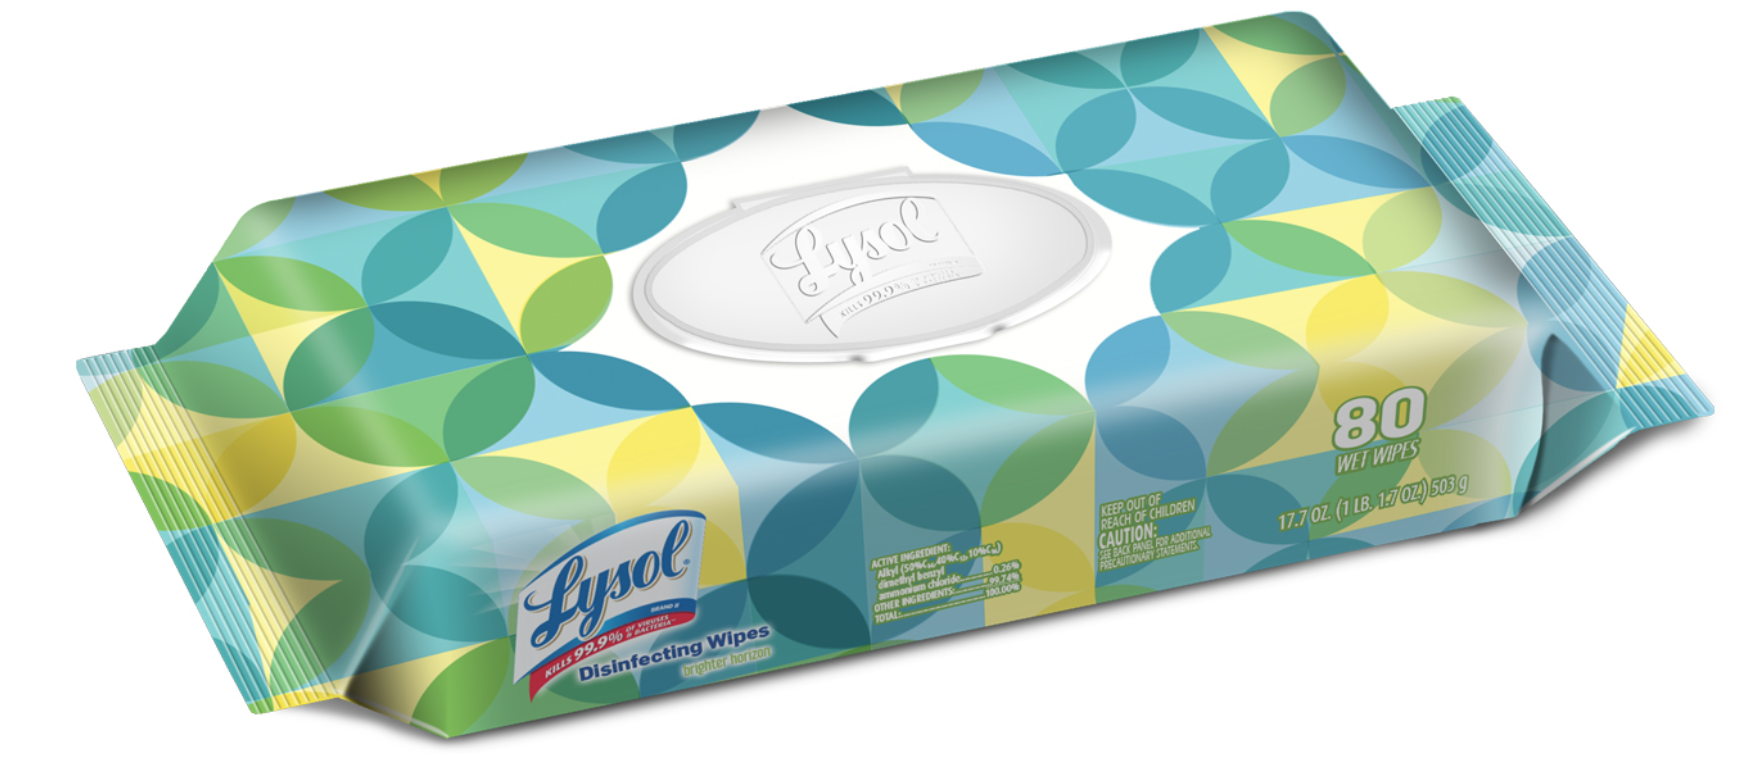 LYSOL Disinfecting Wipes  Brighter Horizon Flat Pack Discontinued Feb 2020